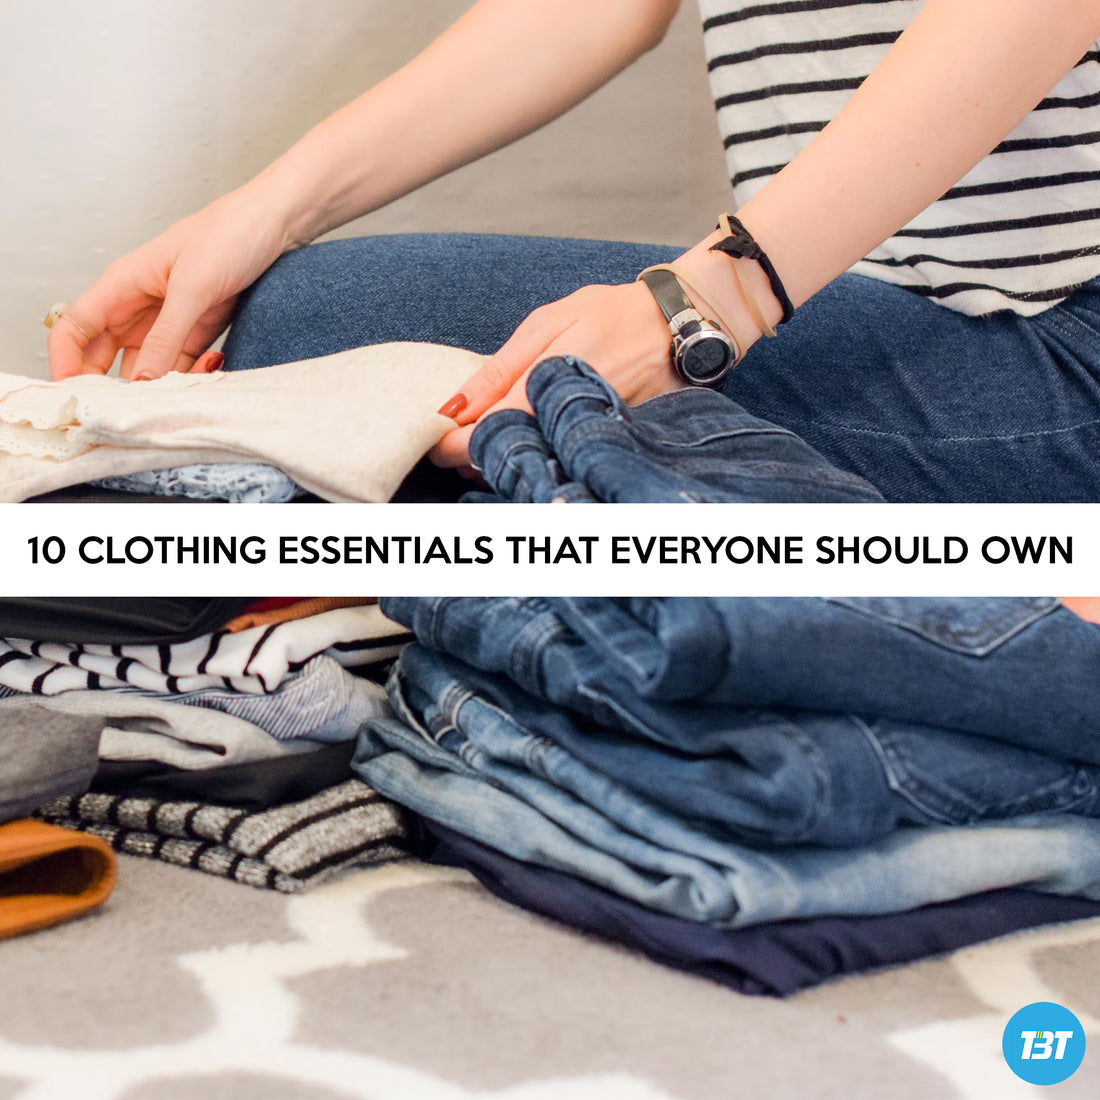 10 CLOTHING ESSENTIALS THAT EVERYONE SHOULD OWN